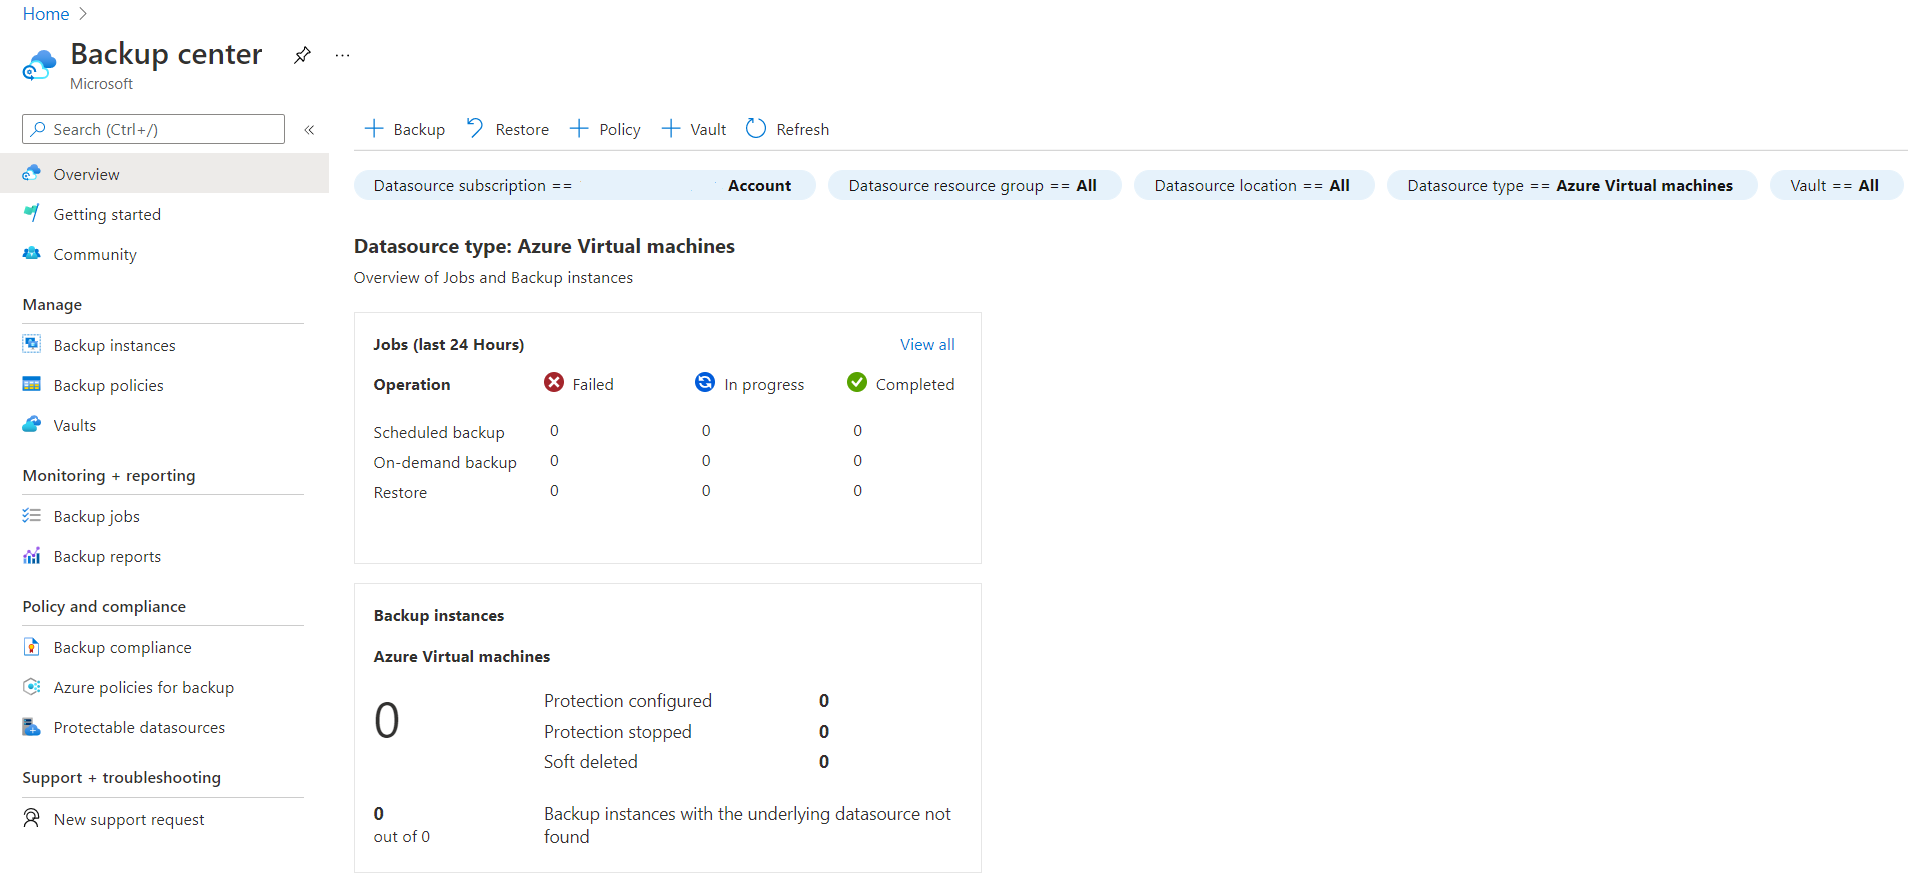 Screenshot of the Backup center user interface in the Azure portal. This image is displaying backup information for Azure Virtual machines related to jobs and backup instances.